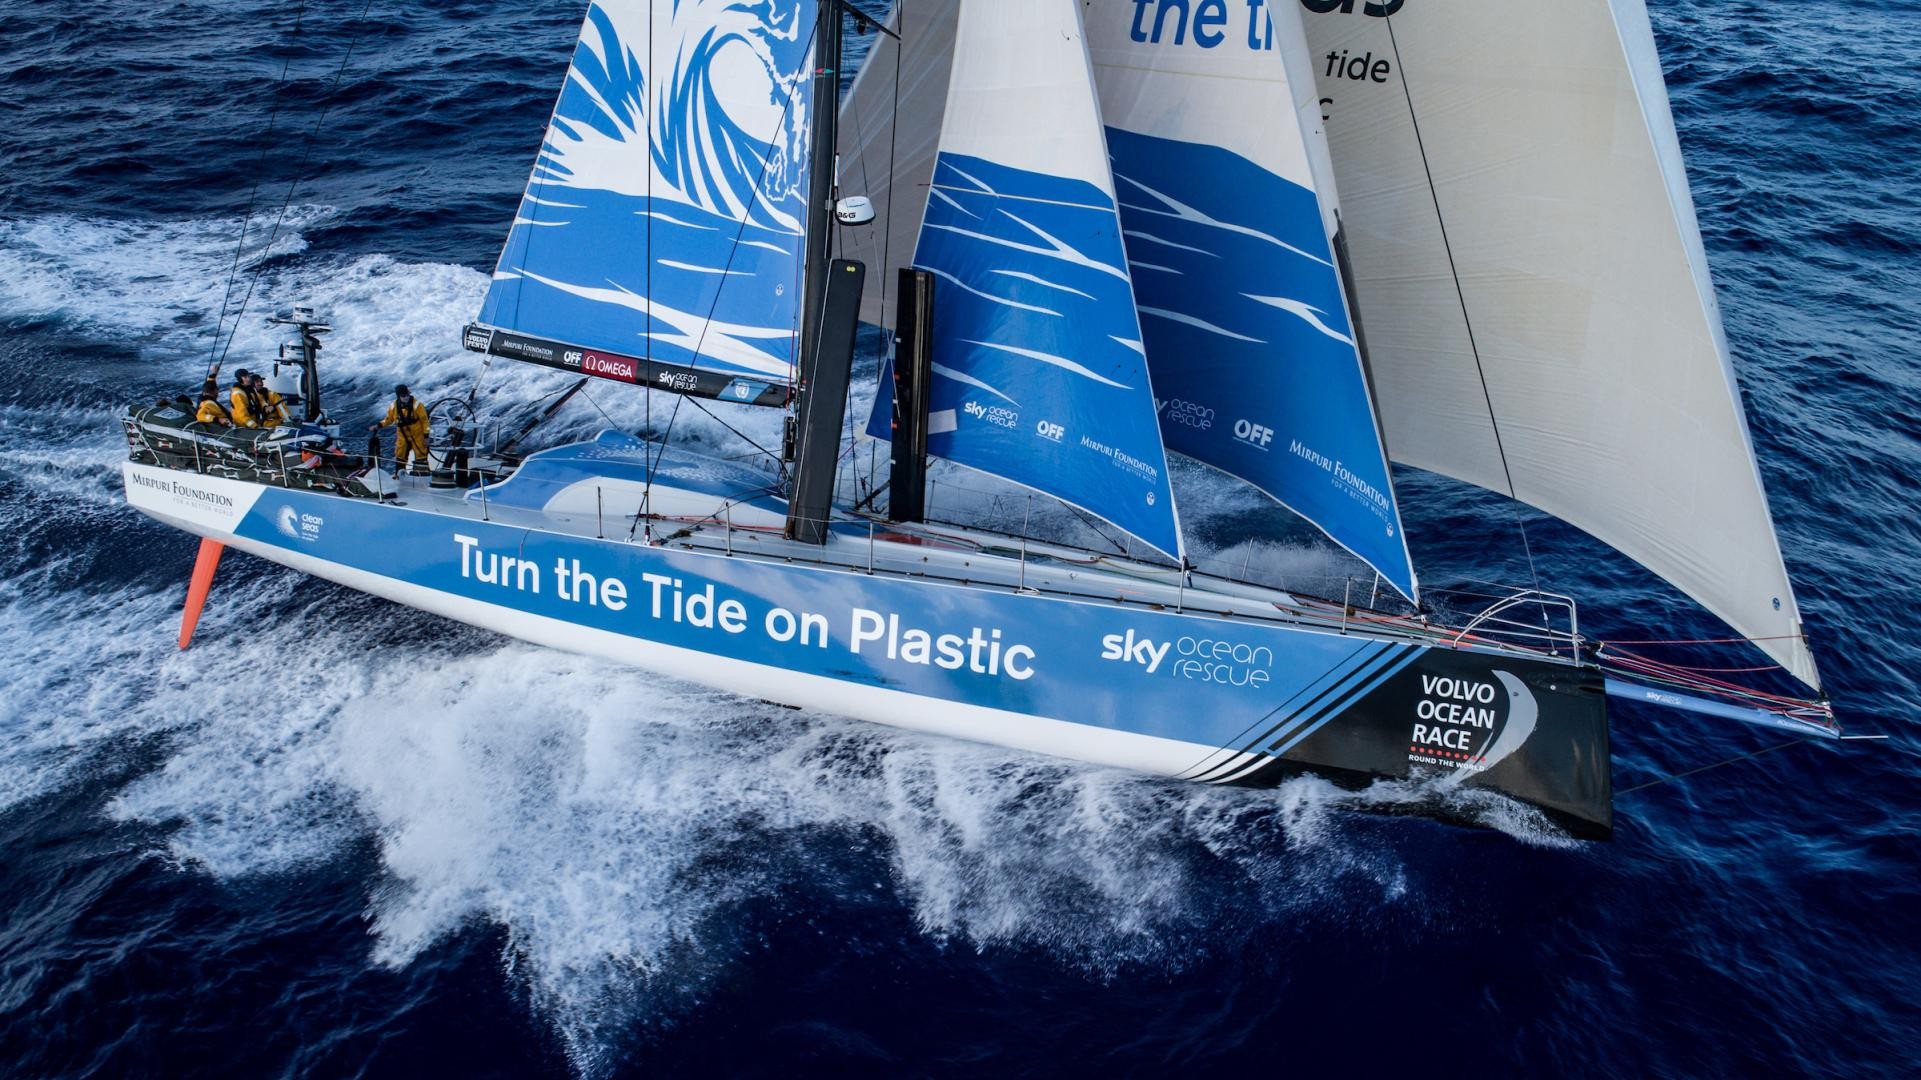 Turn the Tide on Plastic in the 2017-18 edition, the closest in race history